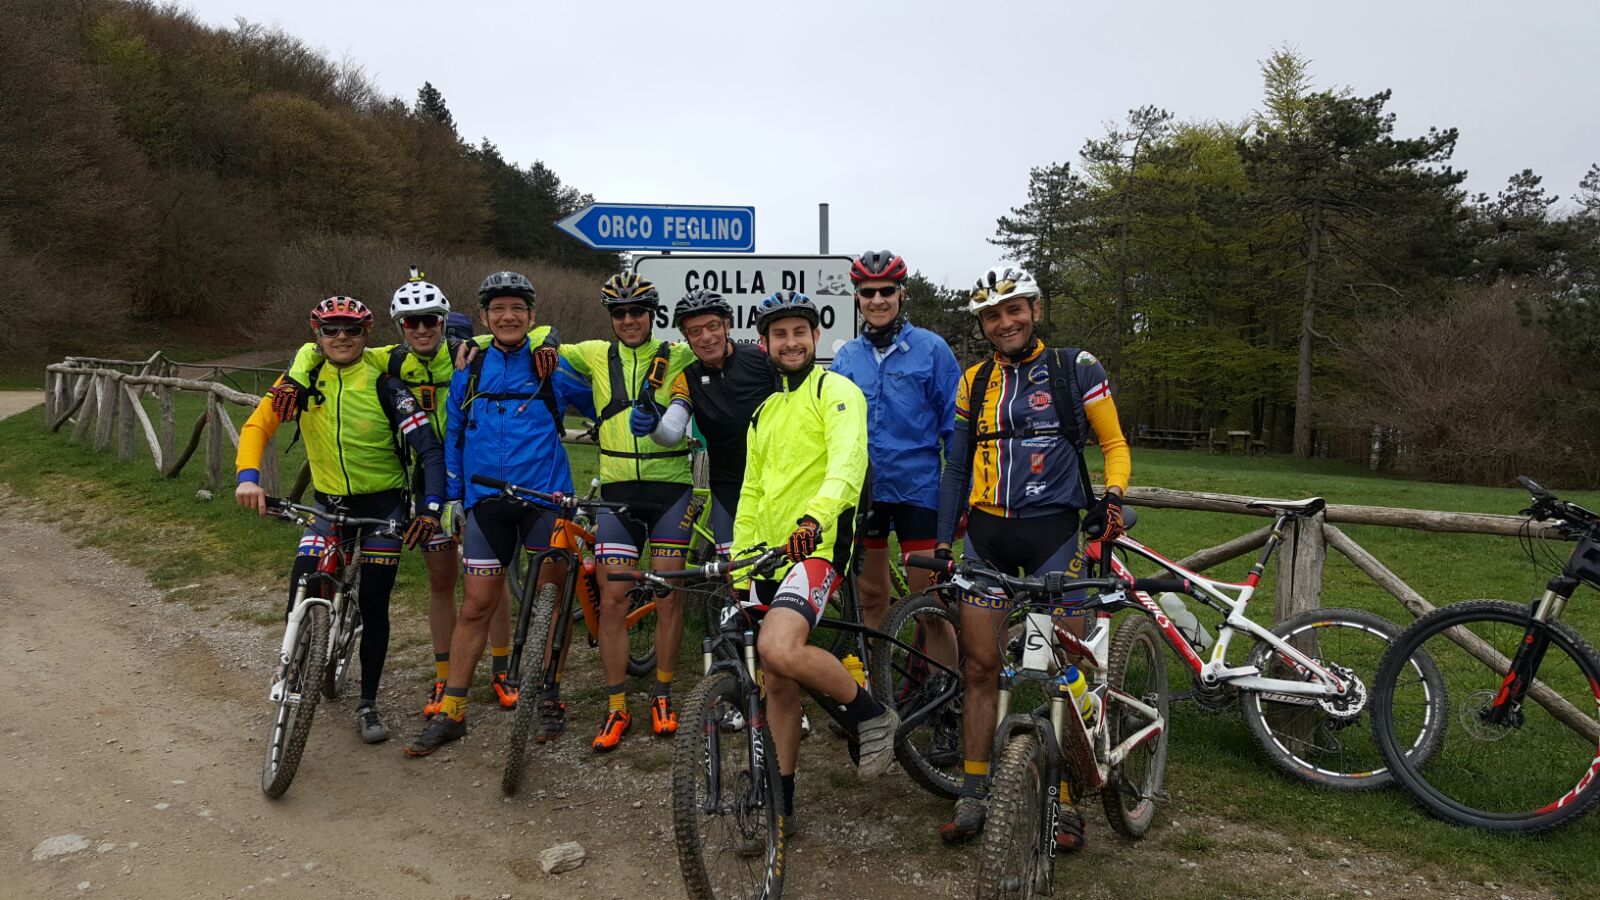 You are currently viewing Escursione in mountain bike a Finale Ligure, 27 aprile 2019